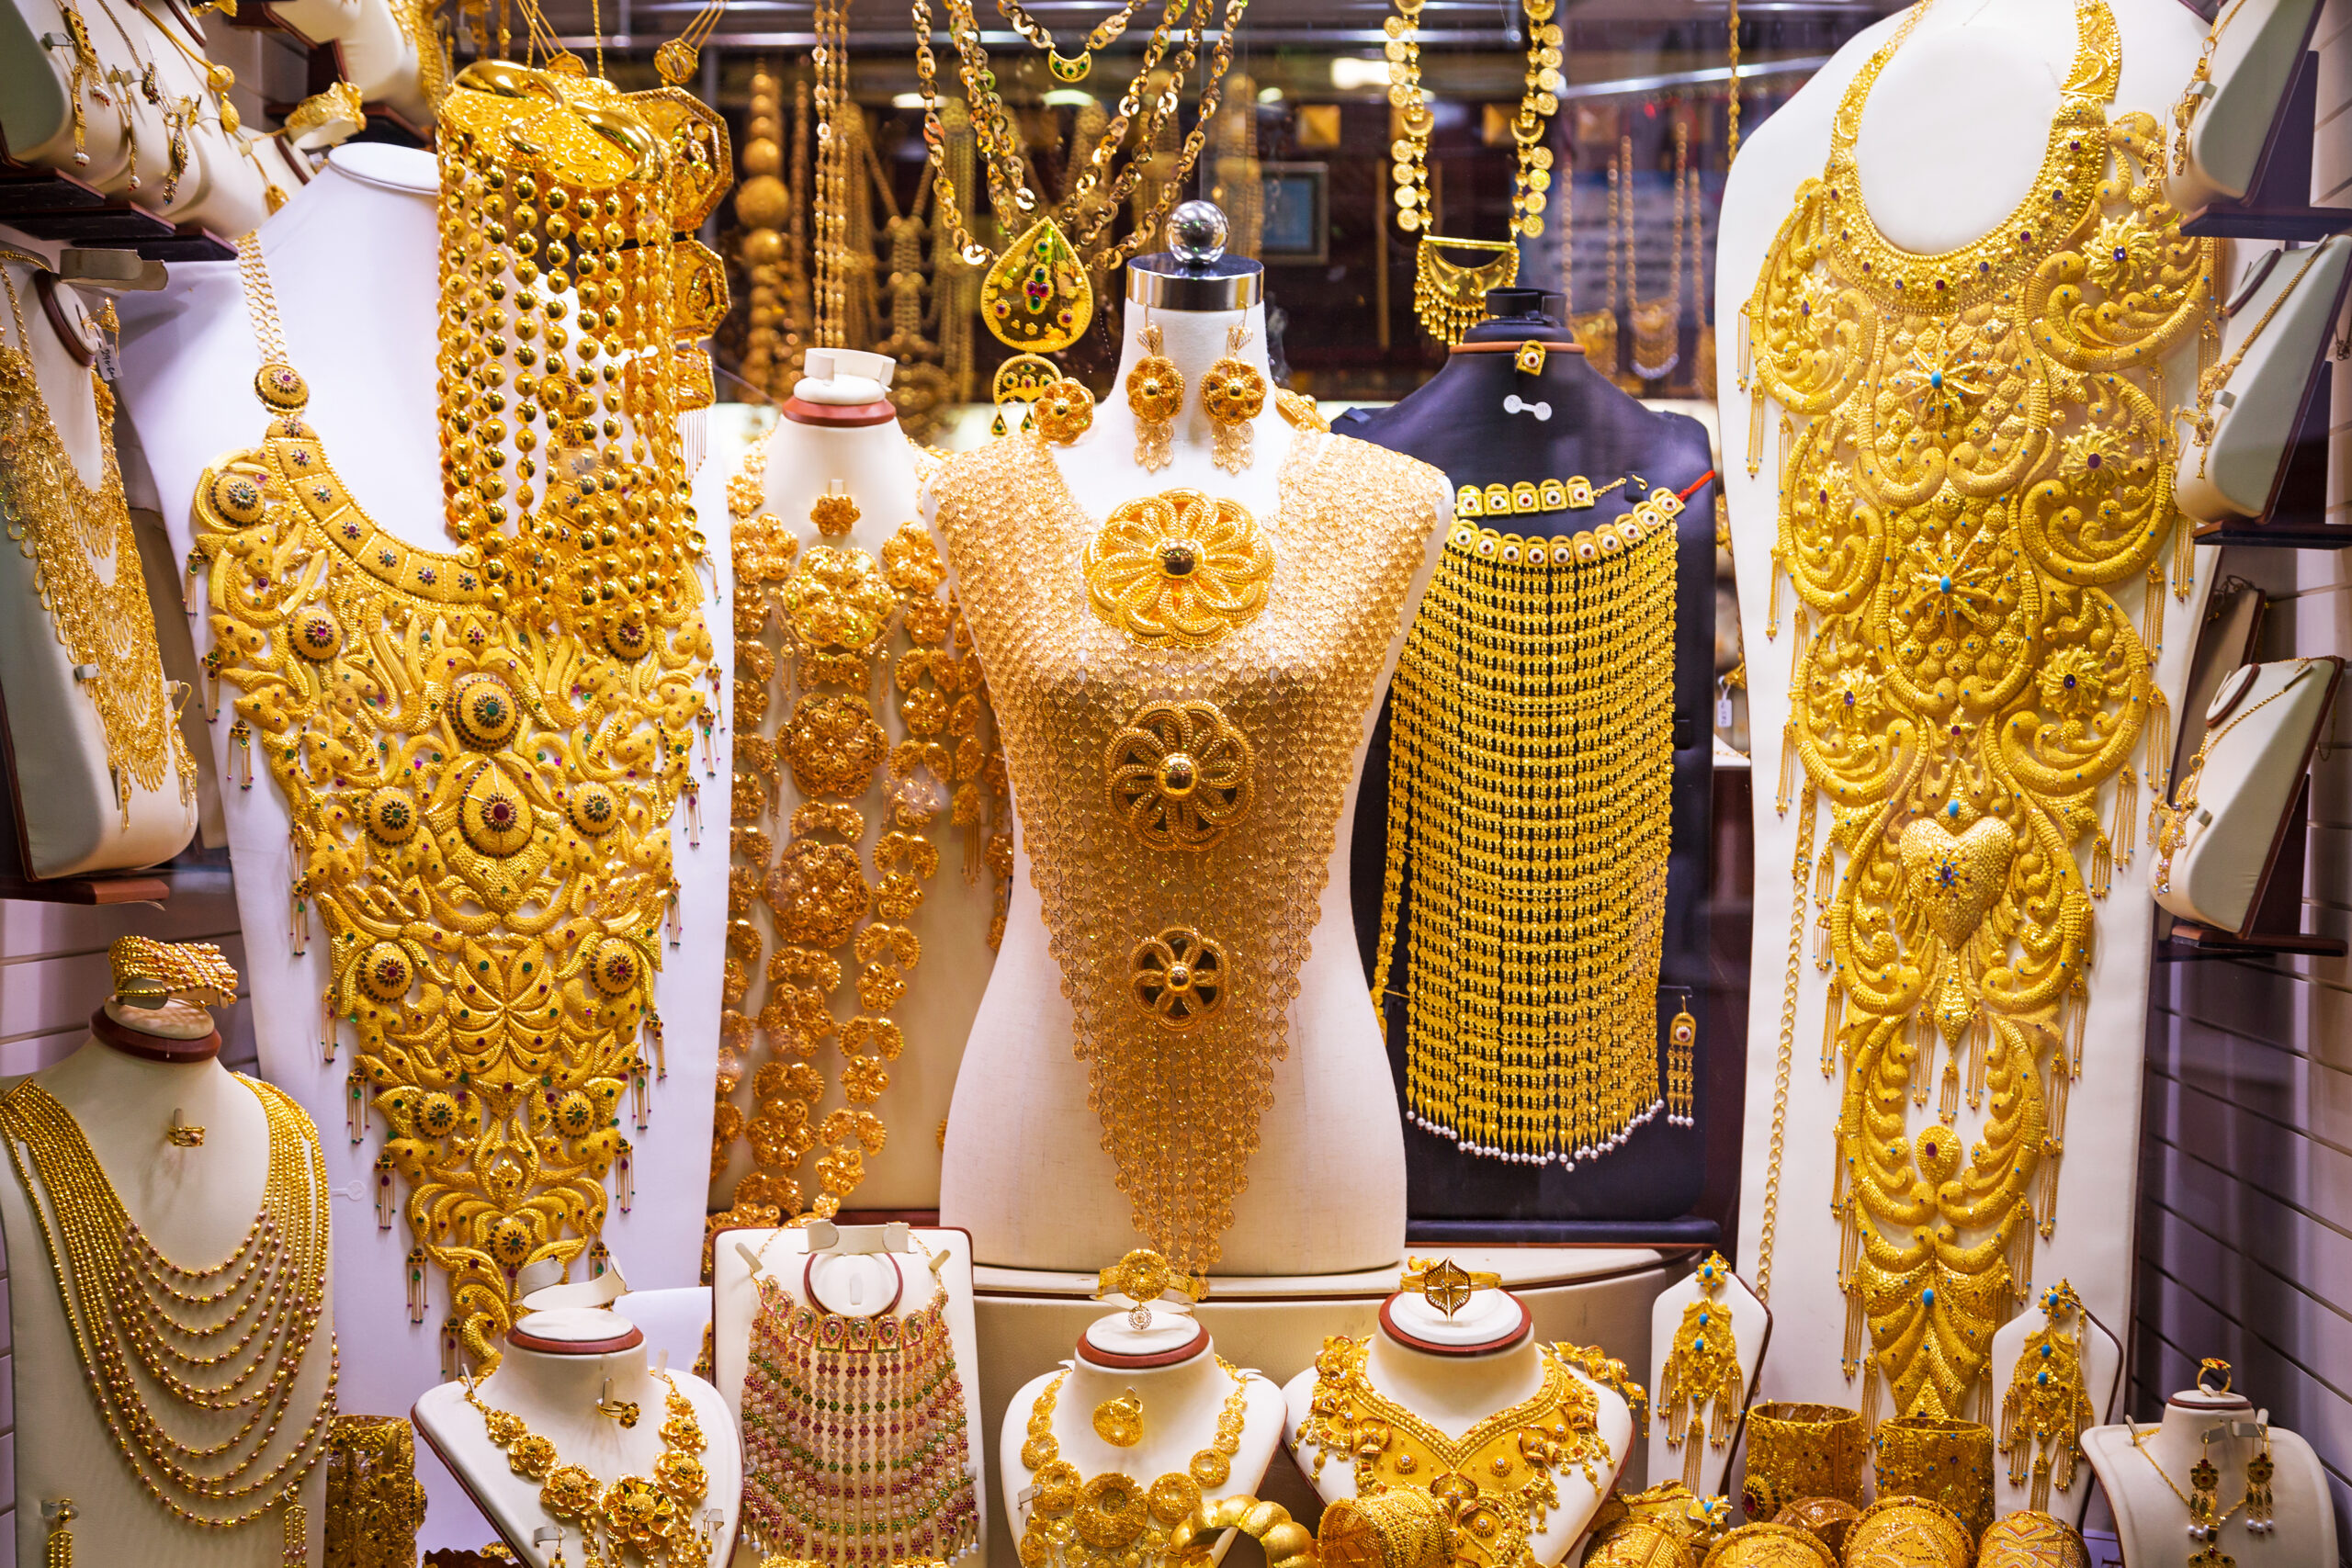 Best things to do during a stopover in Dubai - Dubai Gold Souk